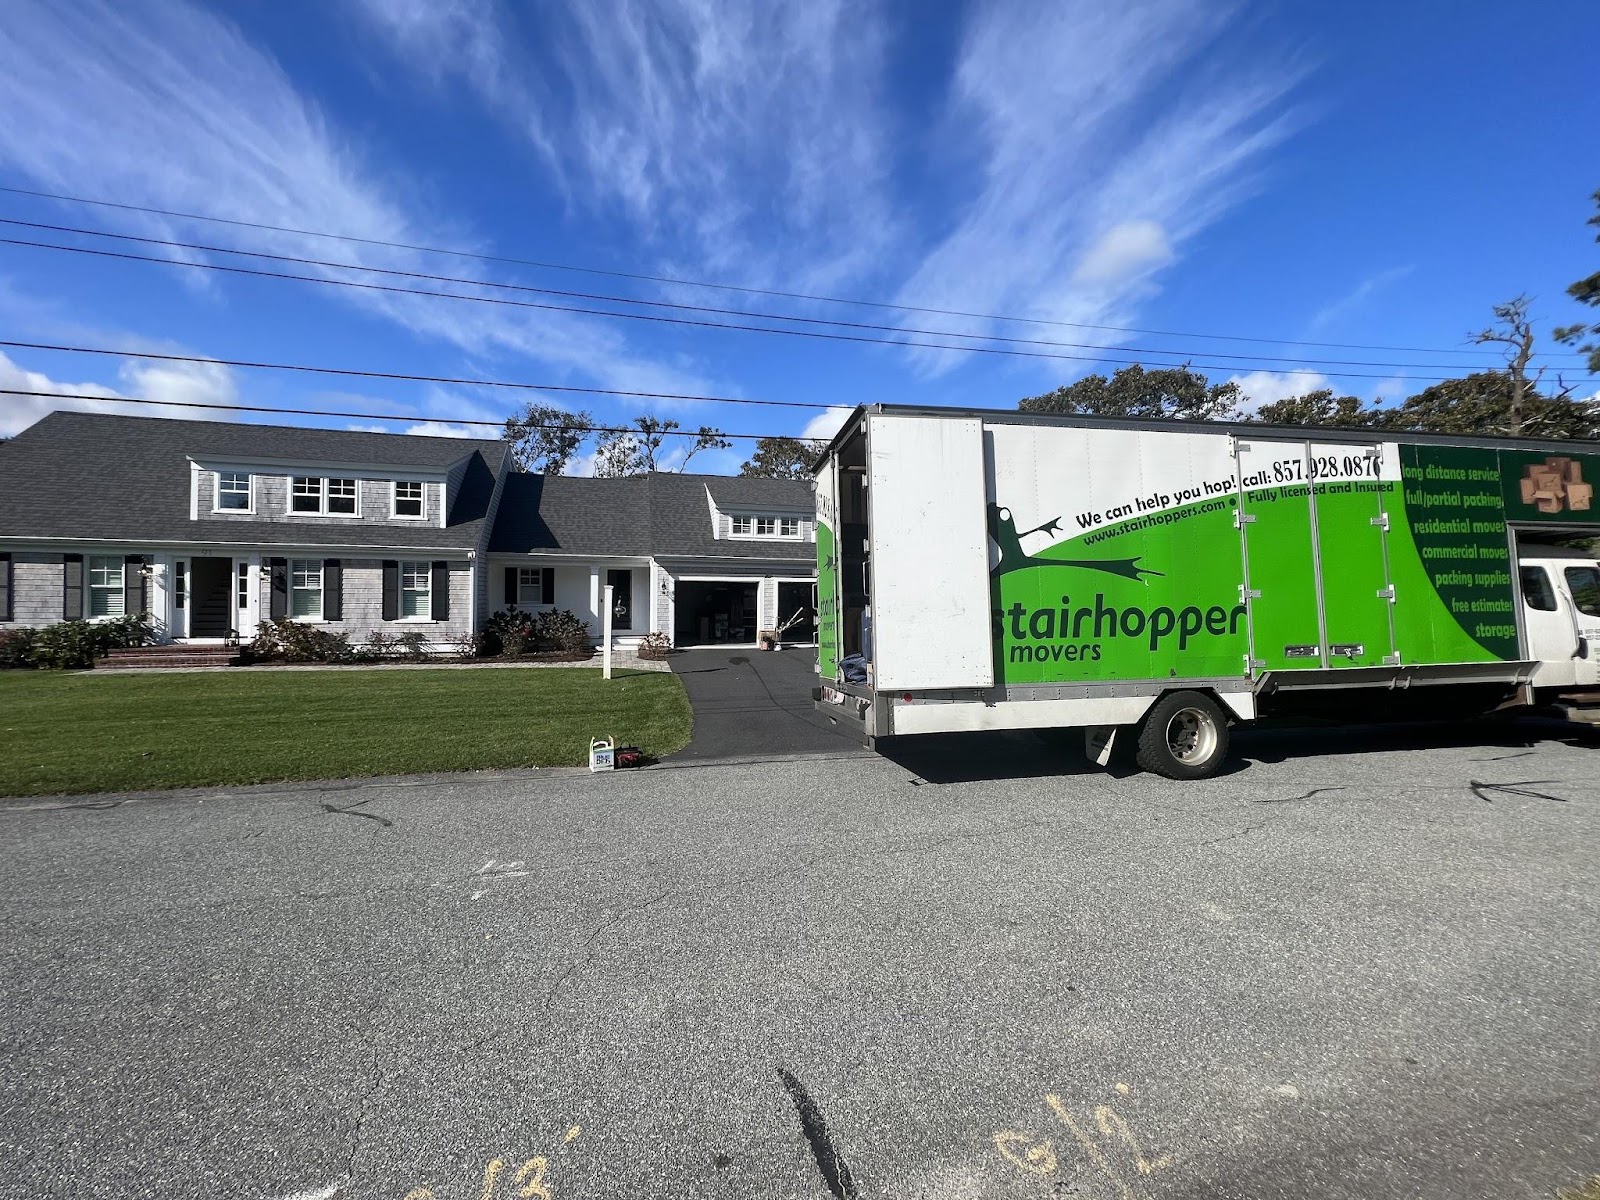 Stairhopper Movers is a team of local Boston movers specializing in all kinds of residential and commercial moves, local and interstate moves, and storage and packing services.